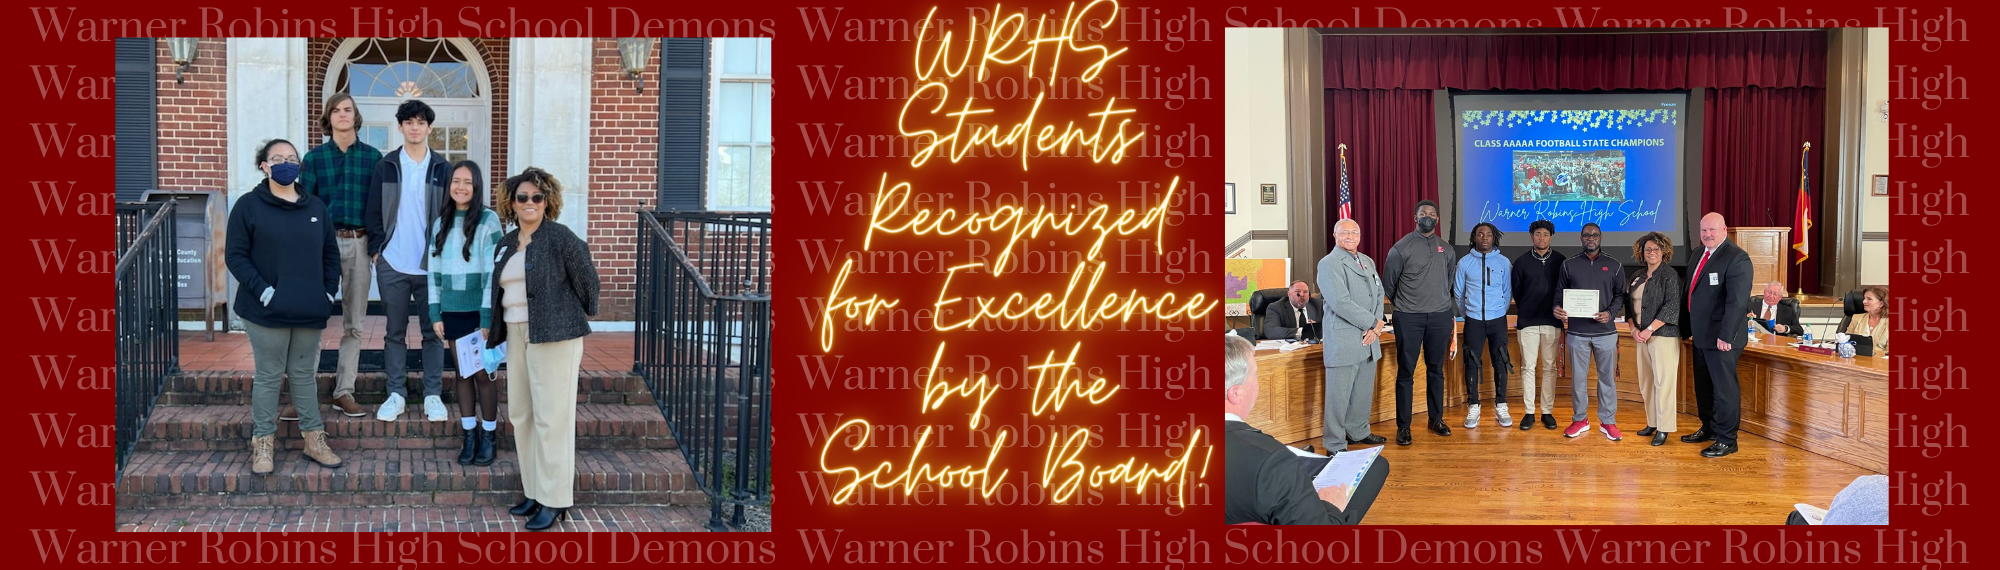 WRHS Students Recognized for Excellence by the School Board!